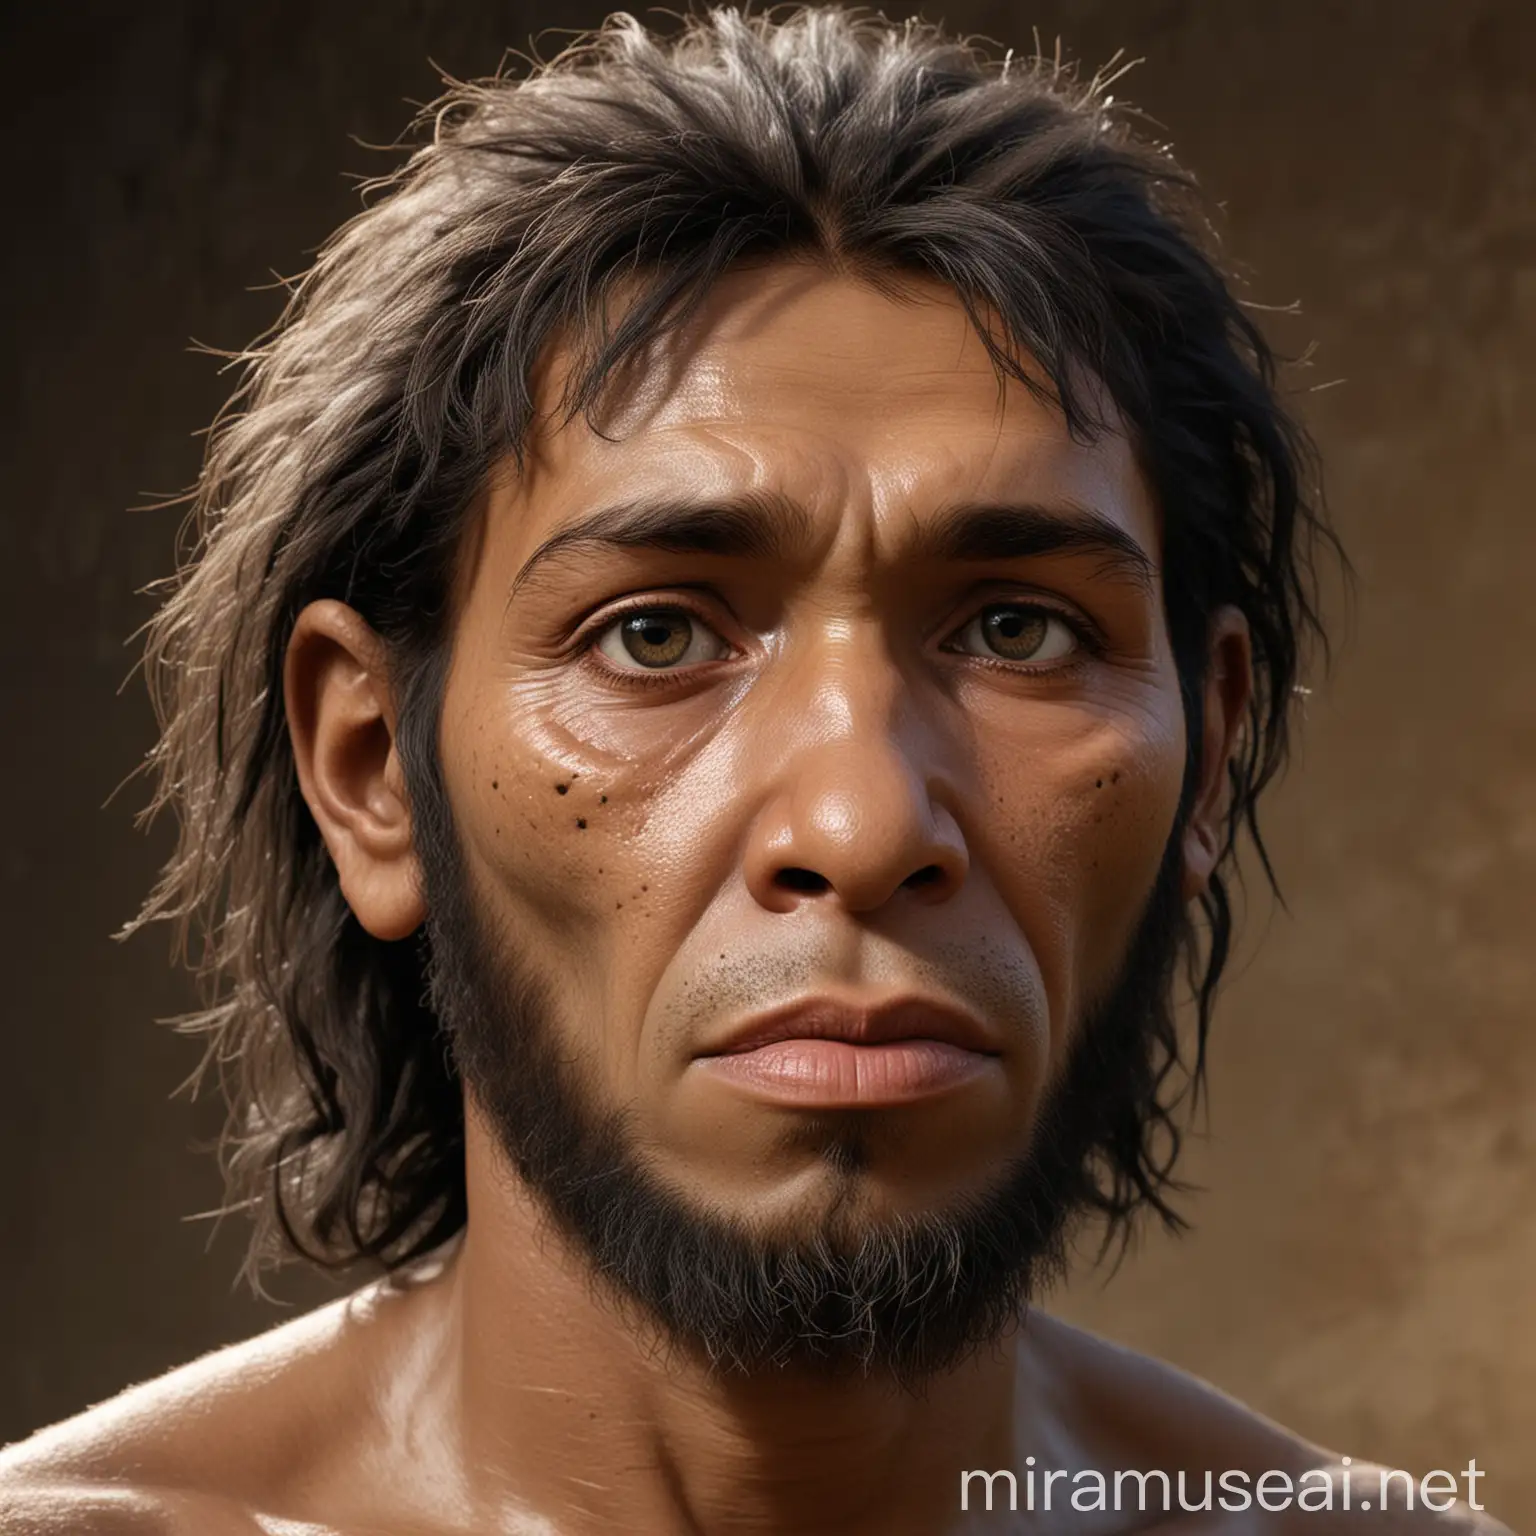 A reconstruction of what world's first modern humans looked like from around 300,000 years ago. It was made based on remains of homo sapiens found at Jebel Irhoud archaeological site in Morocco.